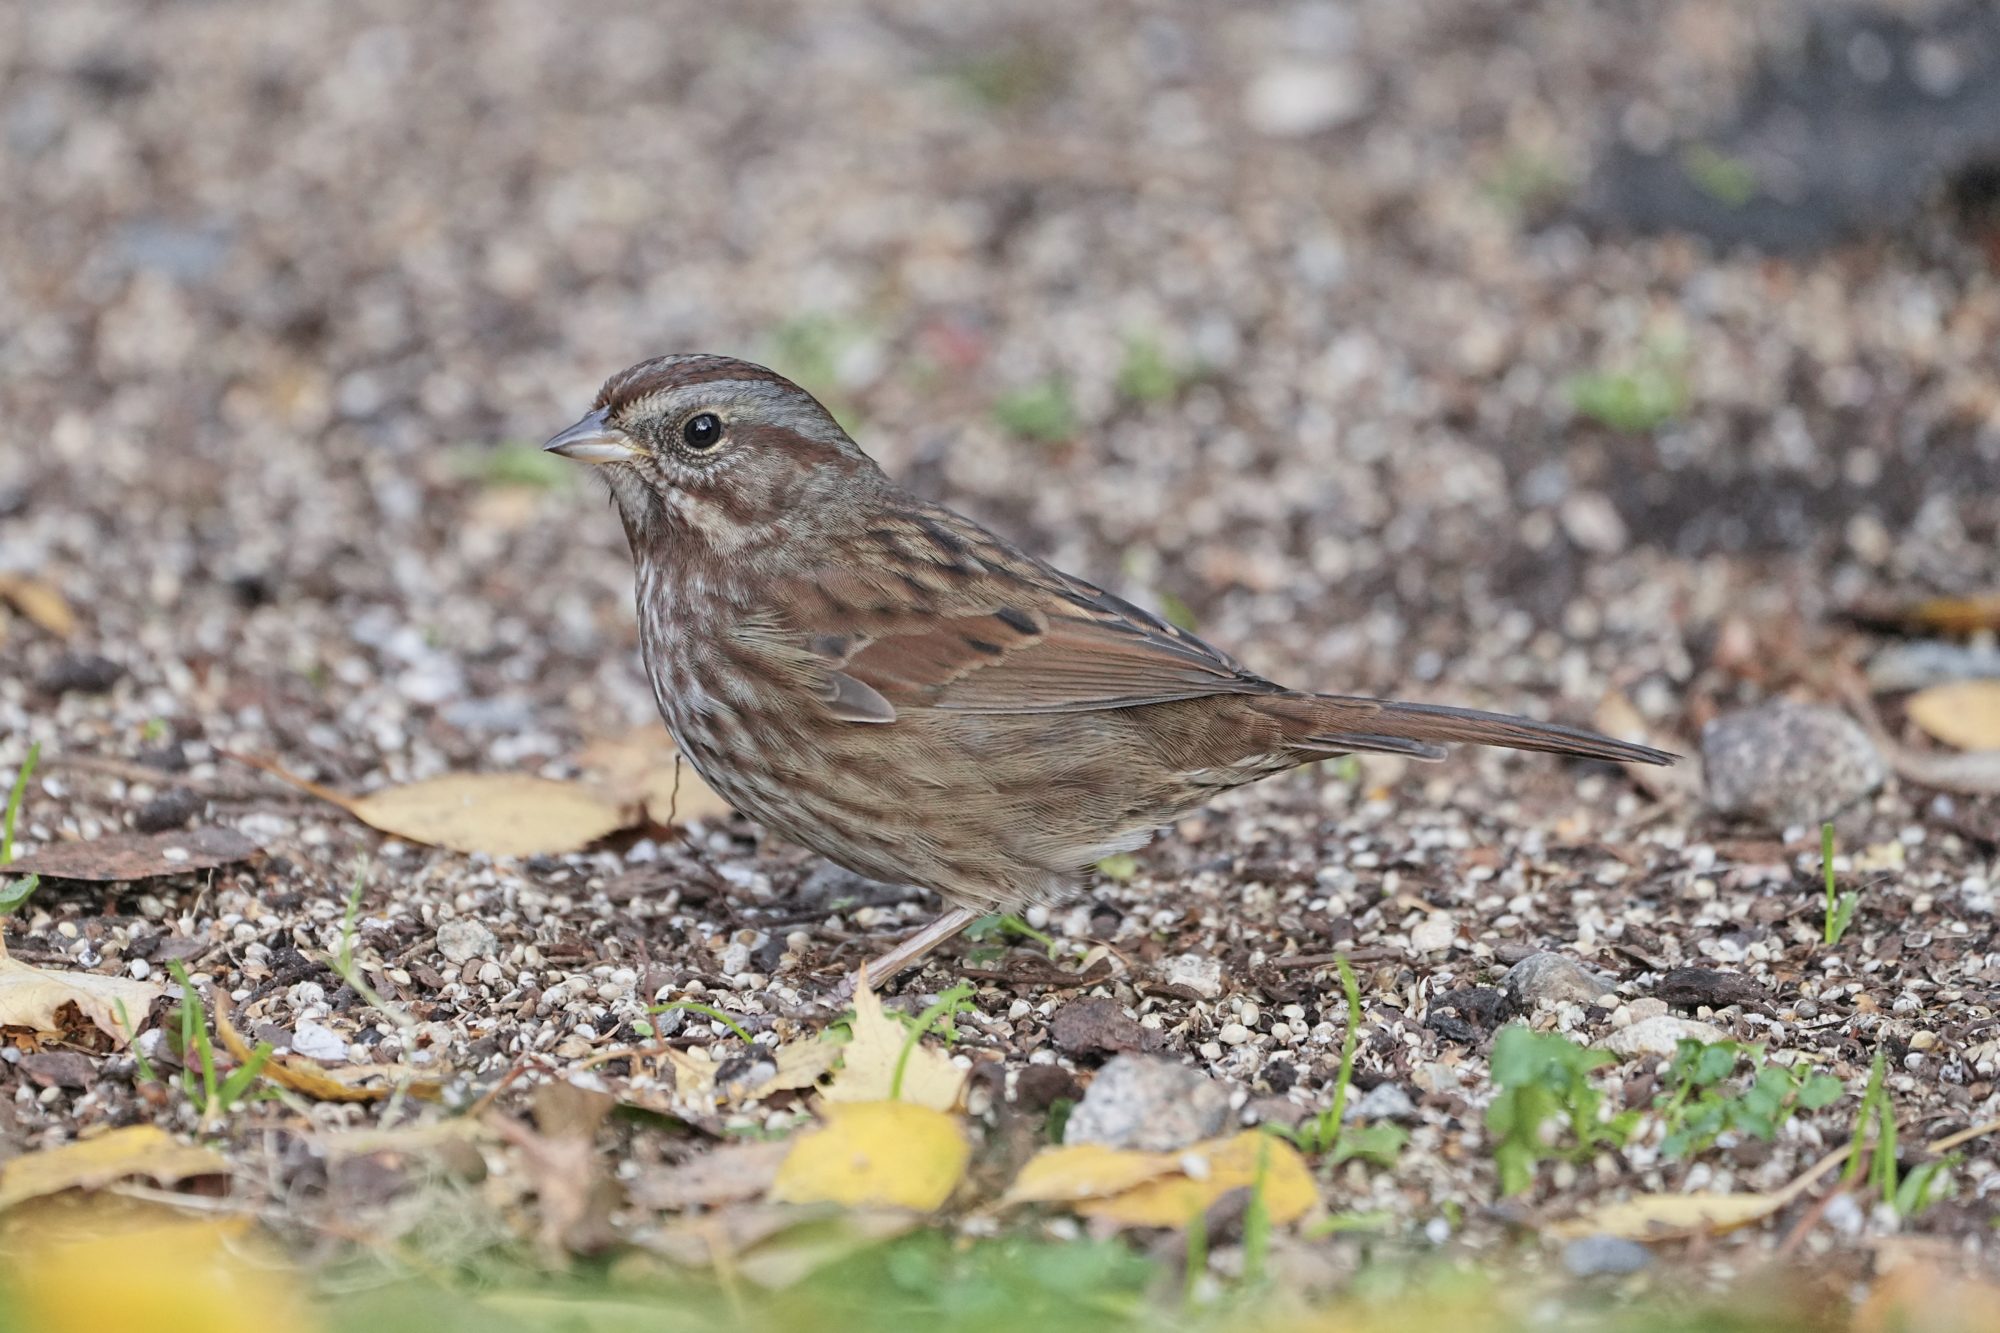 A Song Sparrow is standing on pebbly ground